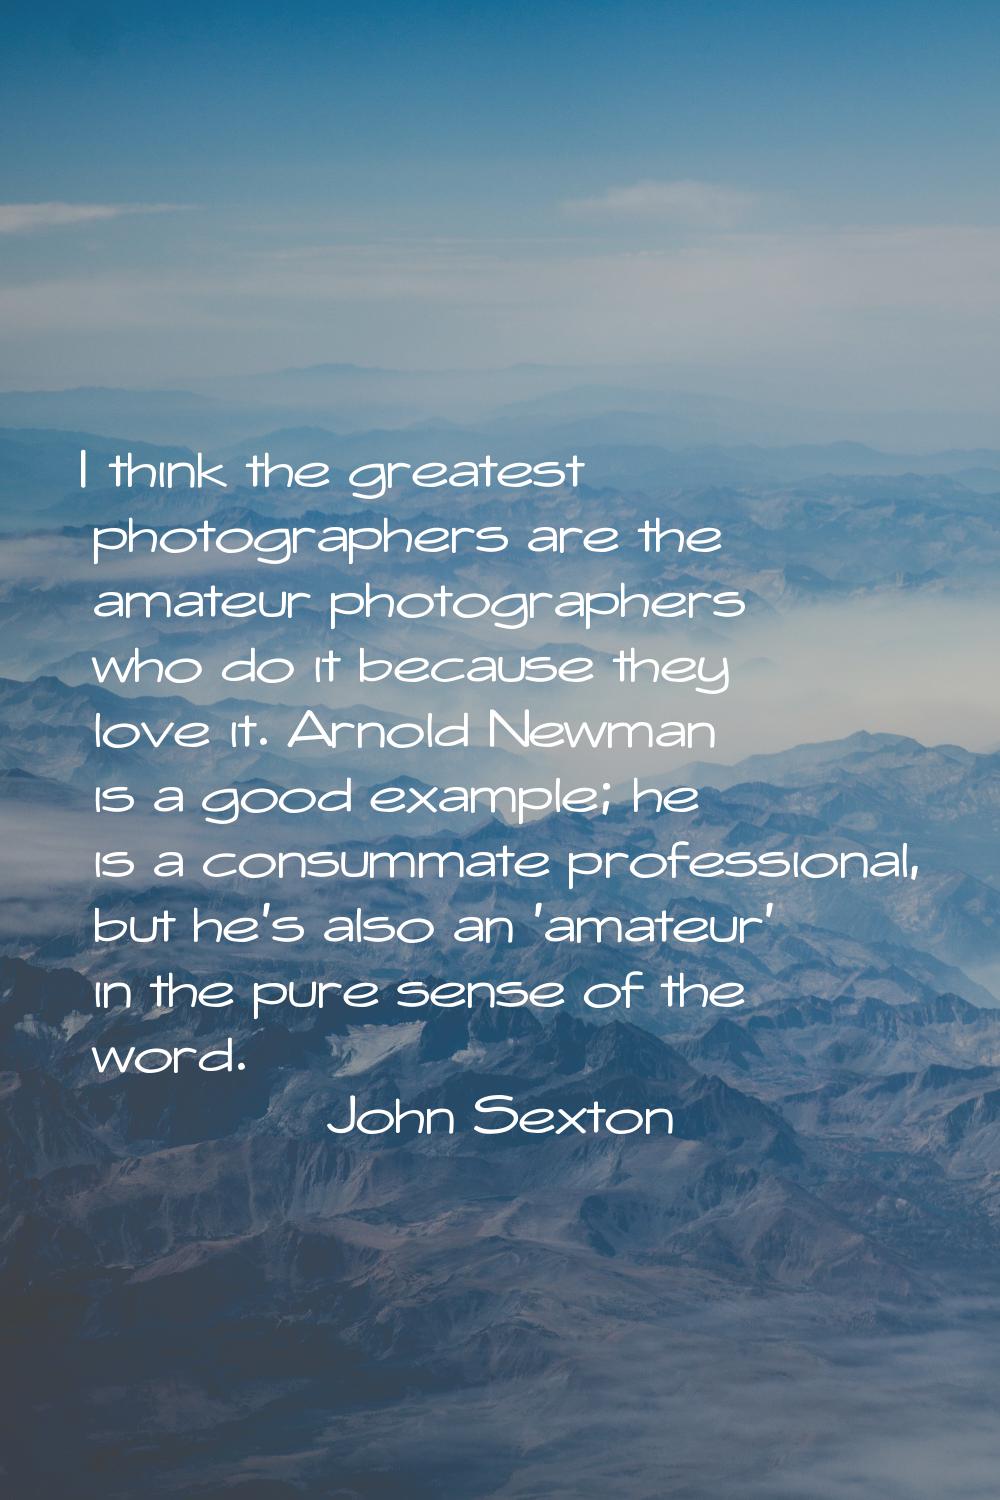 I think the greatest photographers are the amateur photographers who do it because they love it. Ar